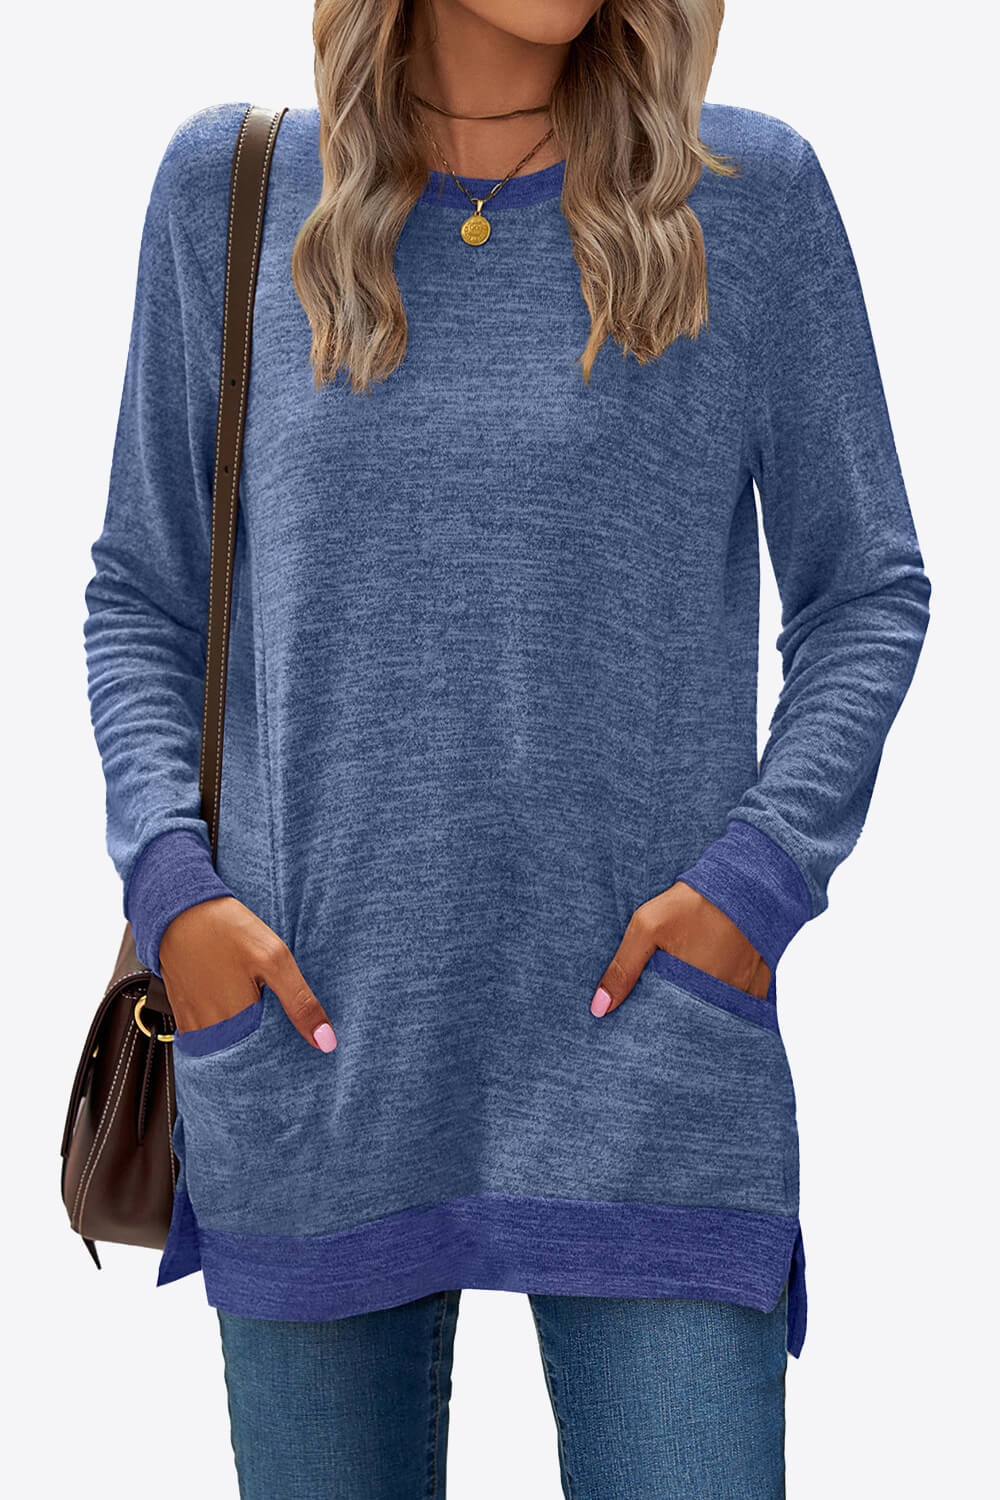 Heathered Slit Top with Pockets - T-Shirts - Shirts & Tops - 35 - 2024